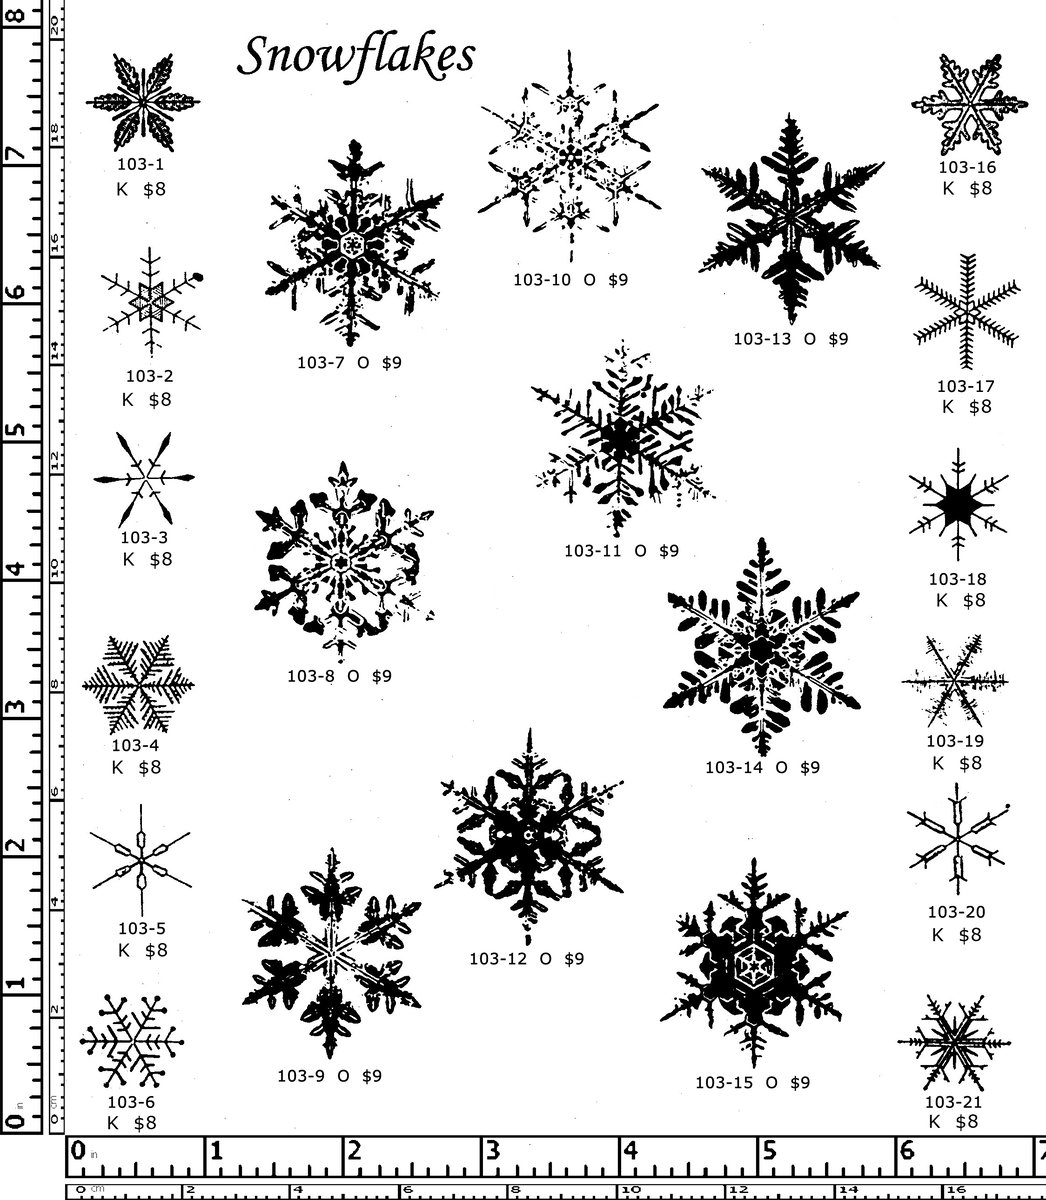 PCP Snowflake Stamps - 10 Designs